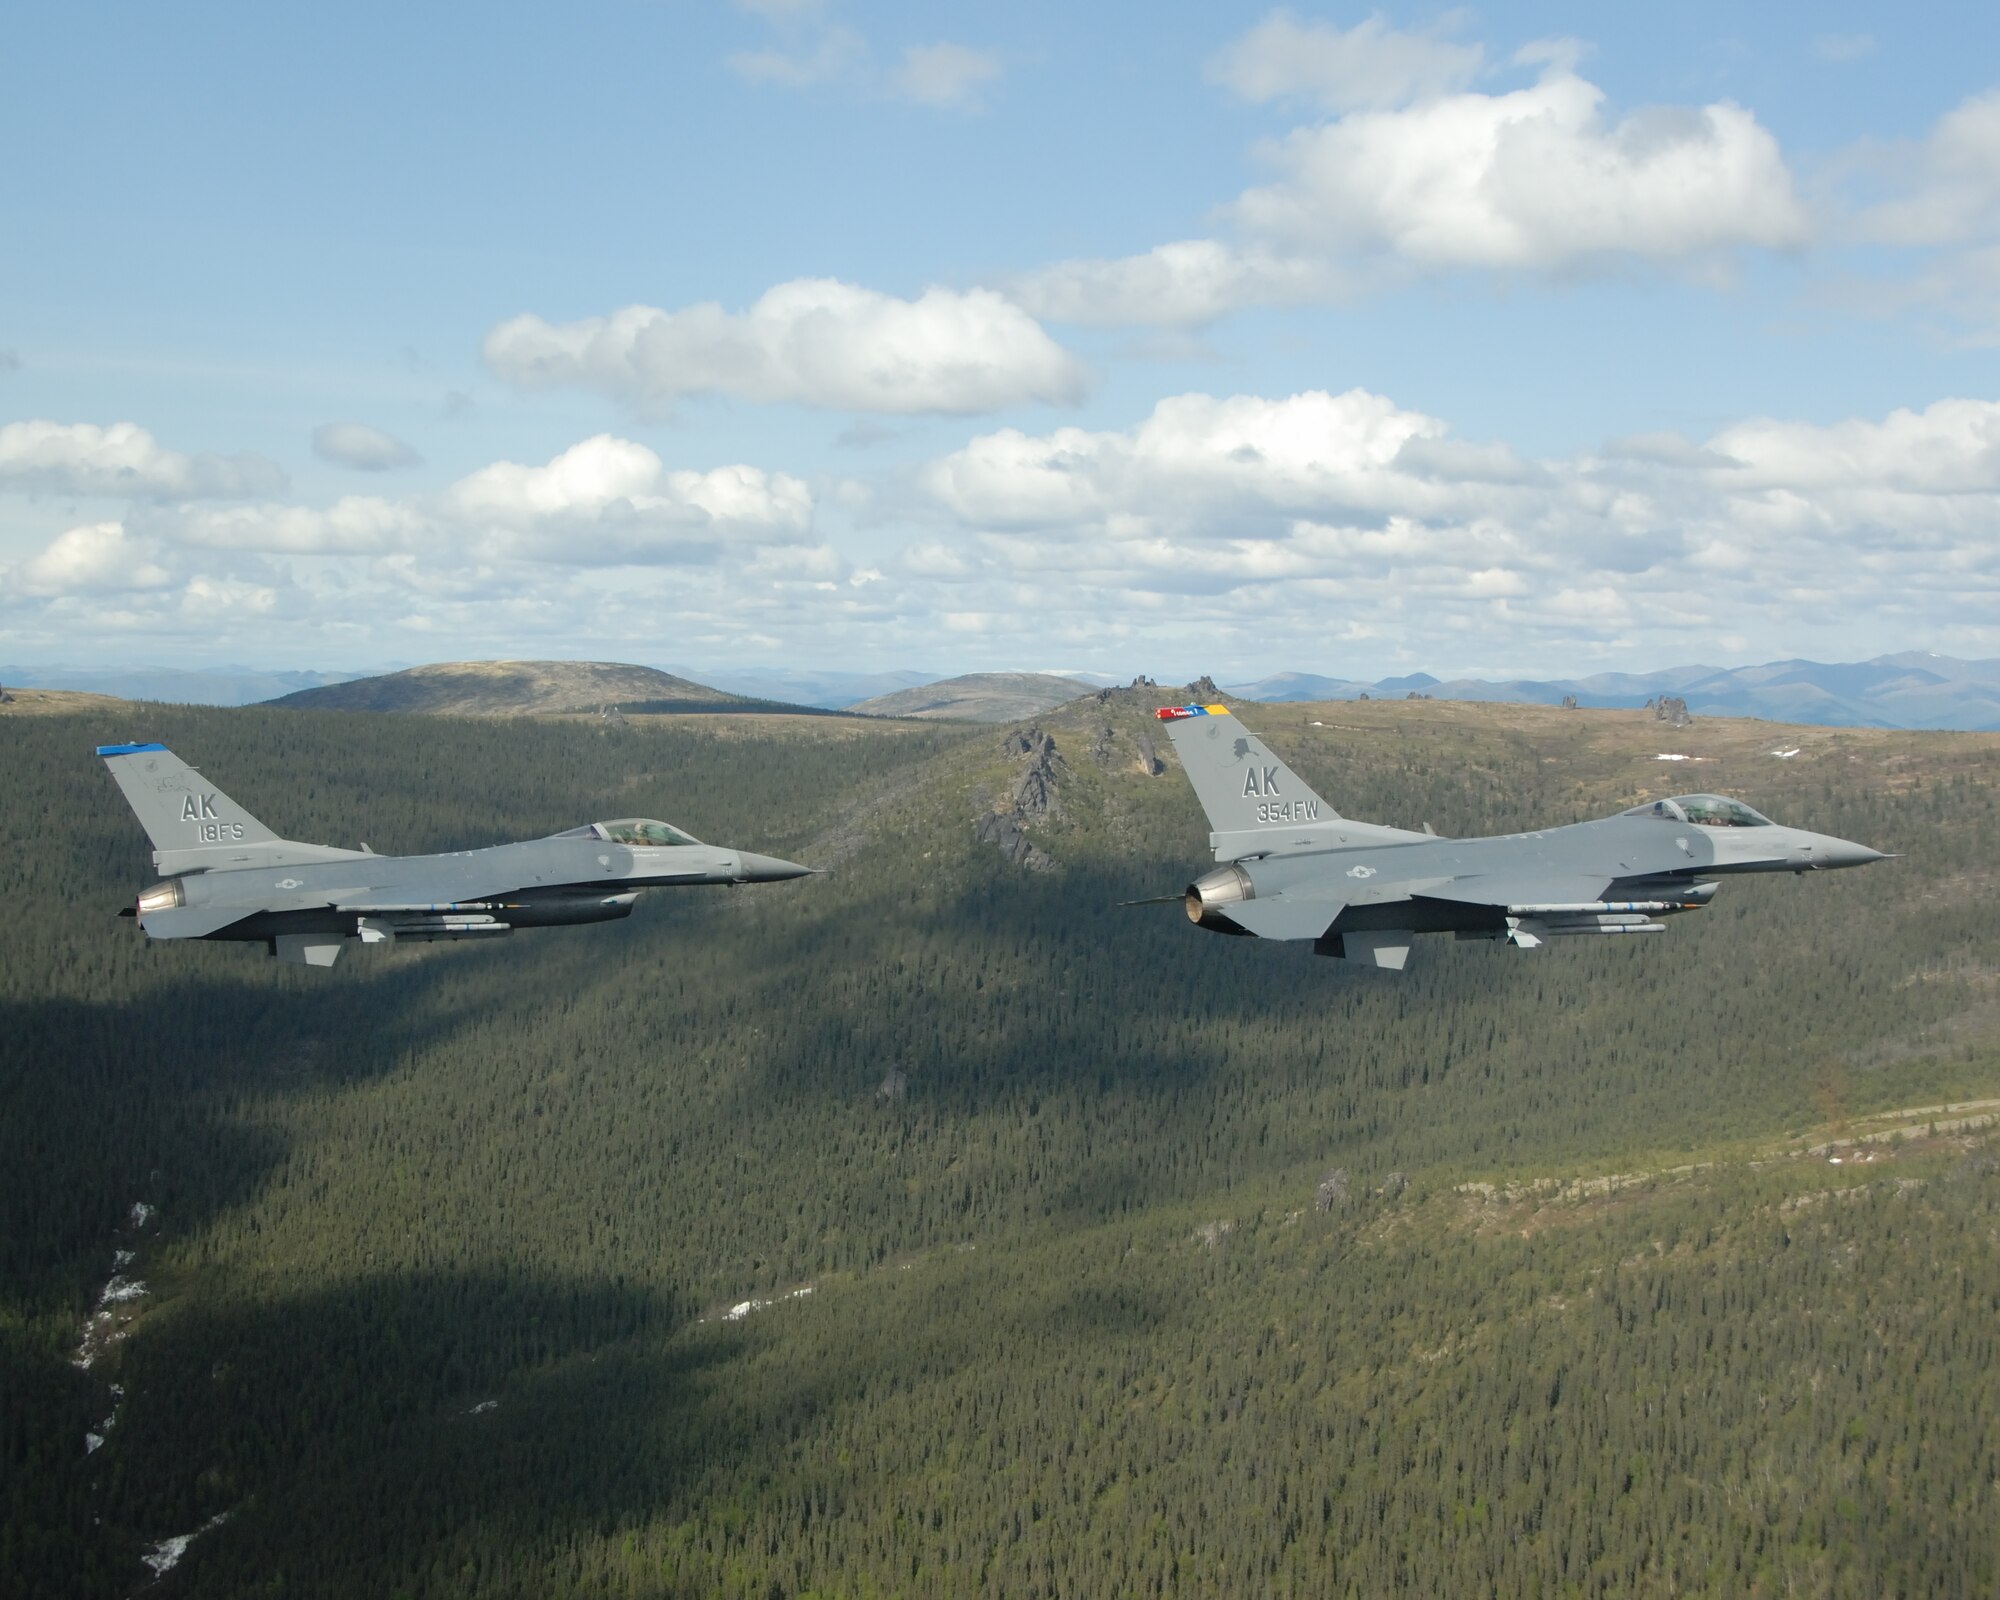 EIELSON AIR FORCE BASE, Alaska -- Two F-16 Fighting Falcons from the 18th Fighter Squadron fly over the Pacific Alaska Range Complex on May 29, 2007.  The aircraft assigned to Eielson flew in formation for the last time due to the deactivation of the 355th FS, and the 18th FS.  (U.S. Air Force photo by Master Sergeant Rob Wieland) 

